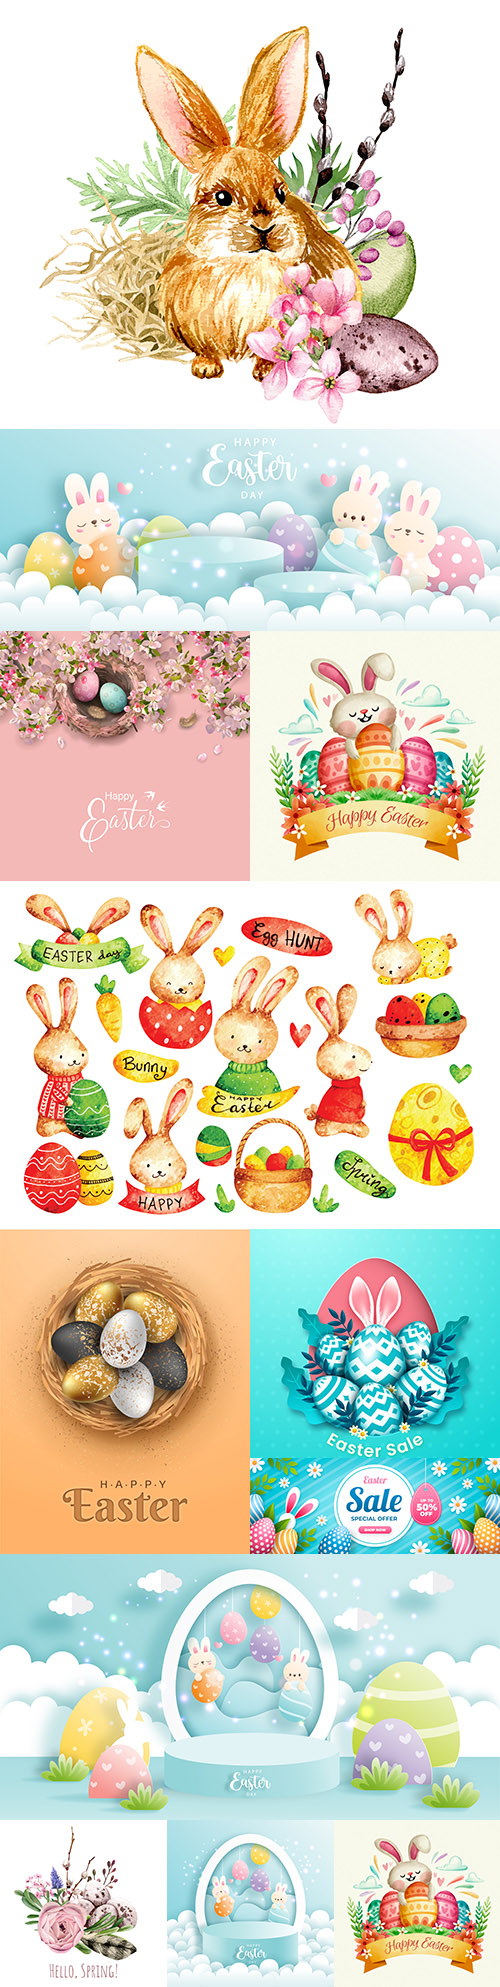 Happy Easter illustrations bunny and elements design 6
